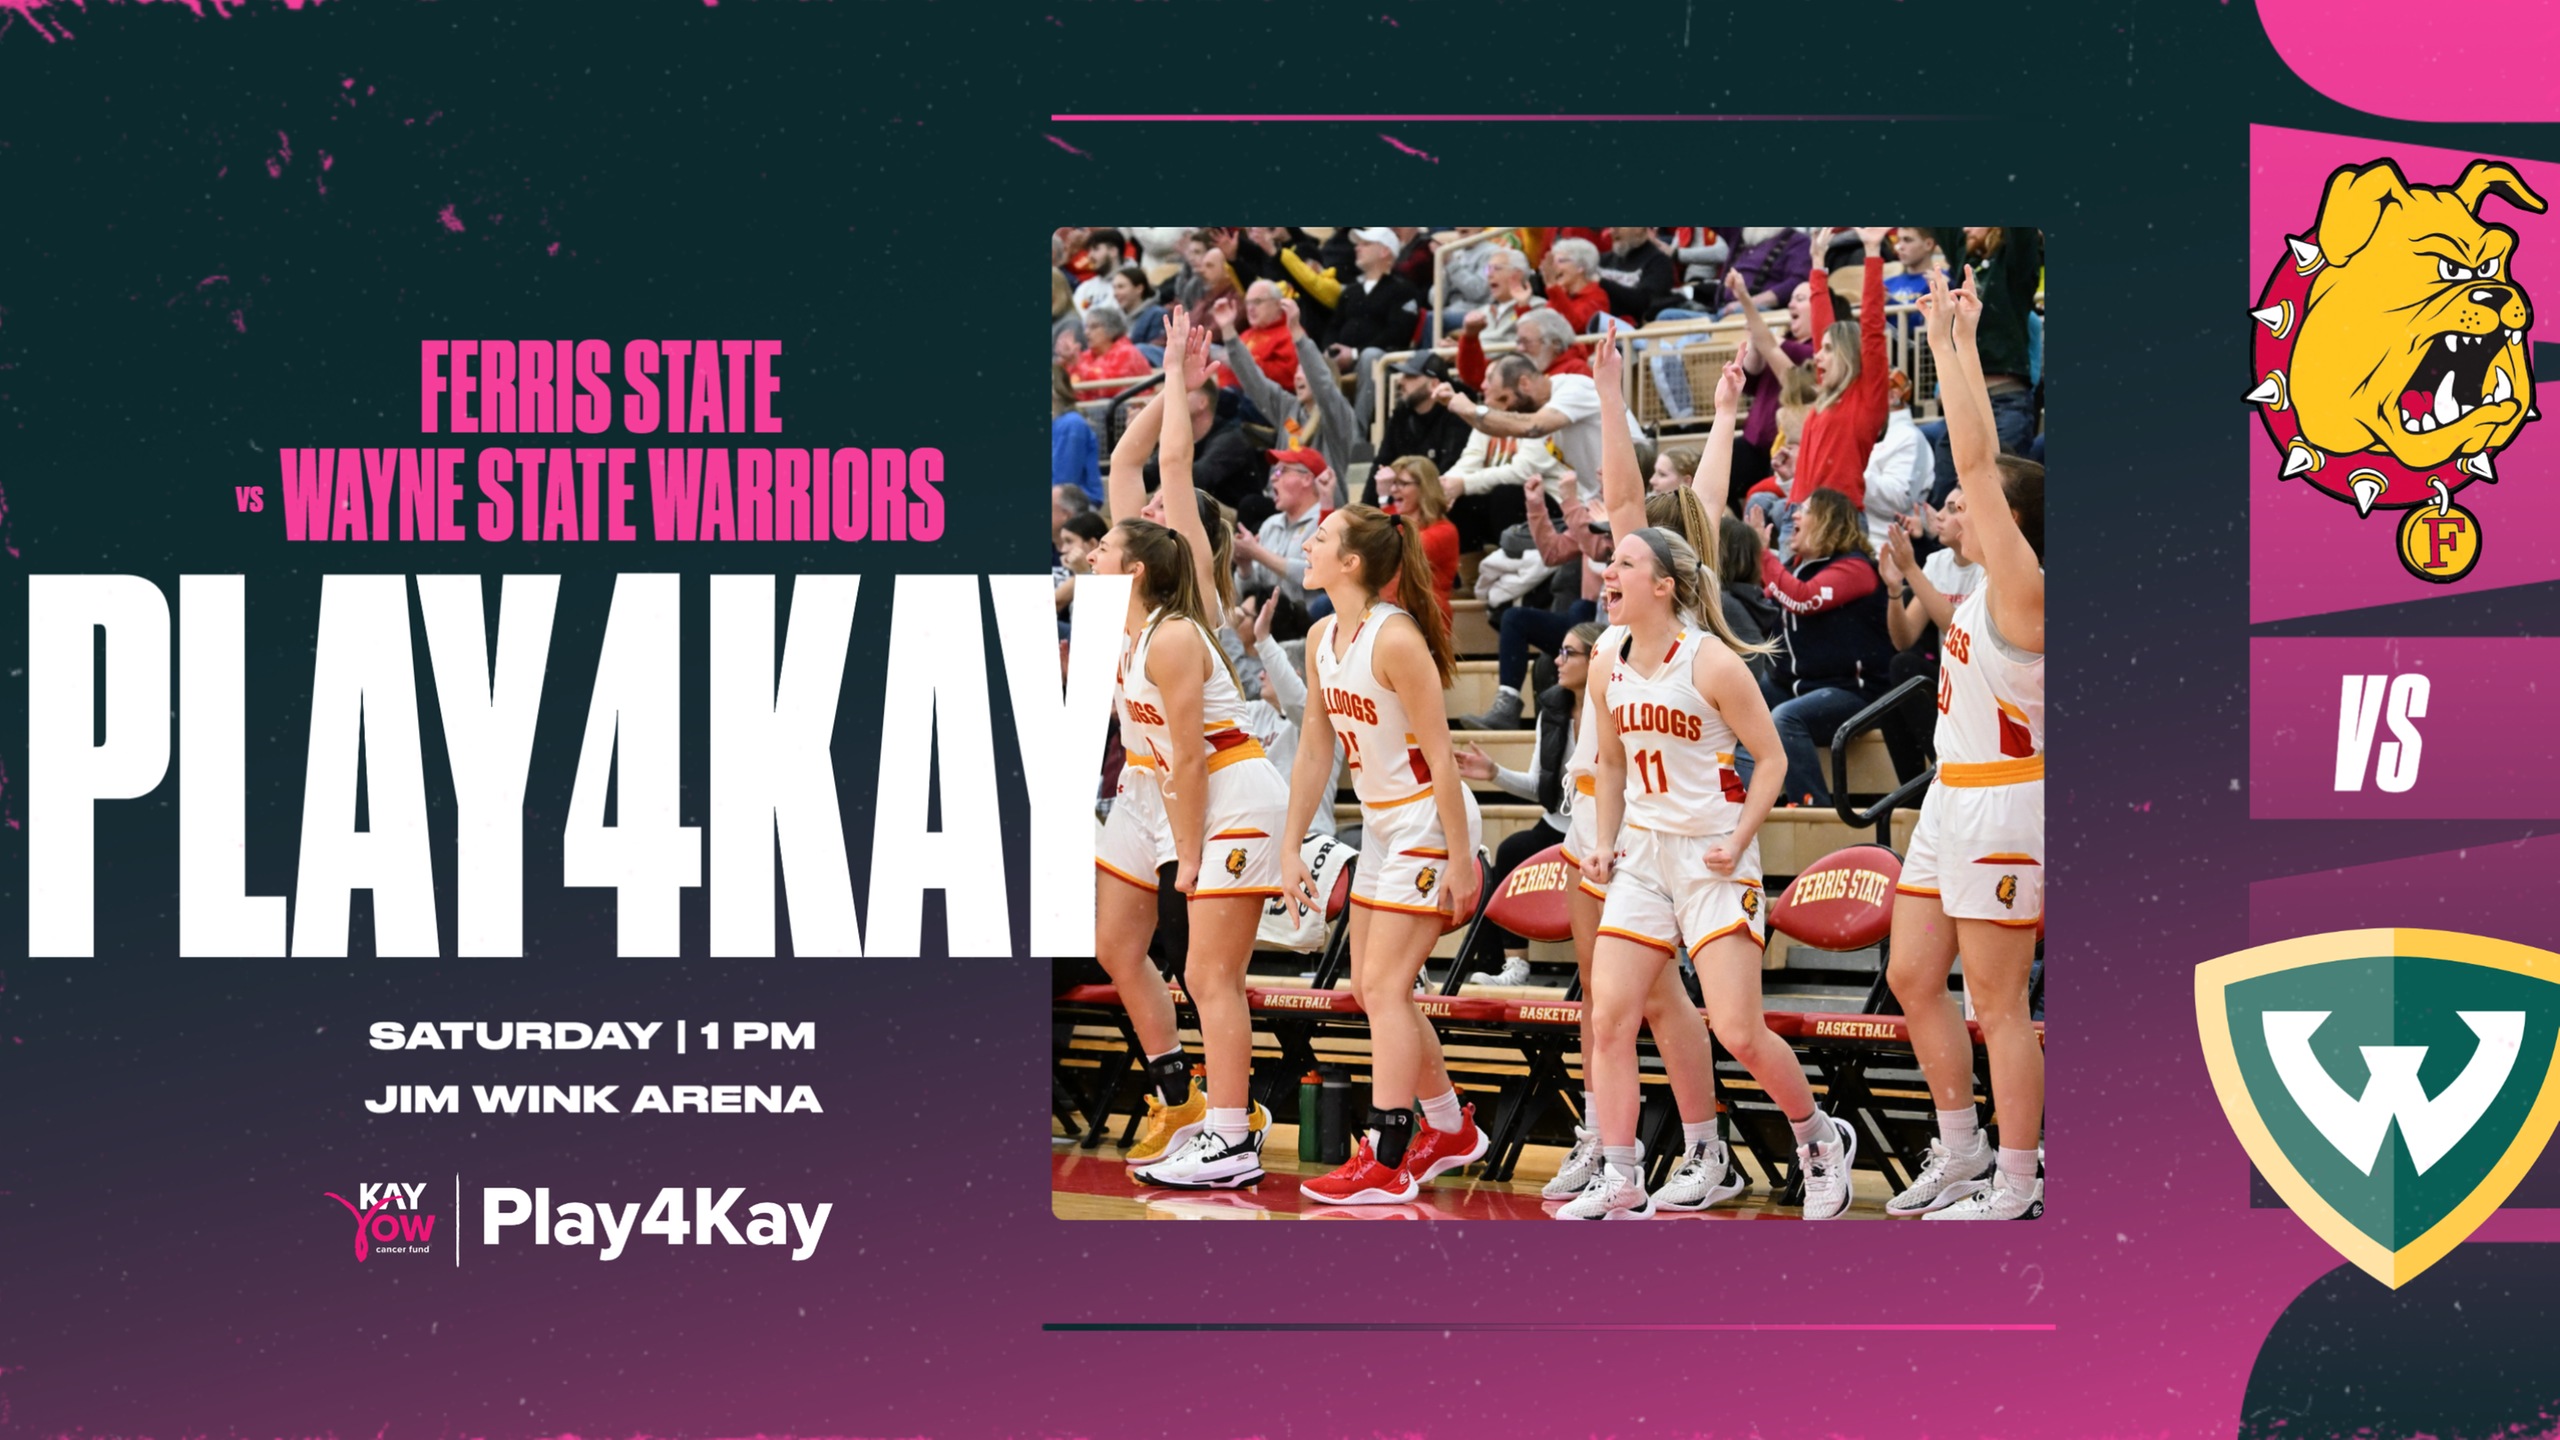 Ferris State Women's Basketball To Take Part In Play4Kay Initiative This Saturday